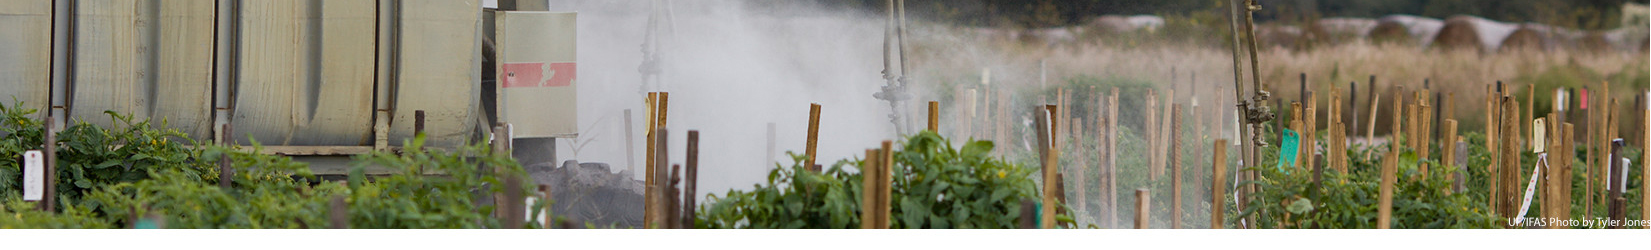 Pesticide spraying in a tomato field. UF/IFAS photo by Tyler Jones.